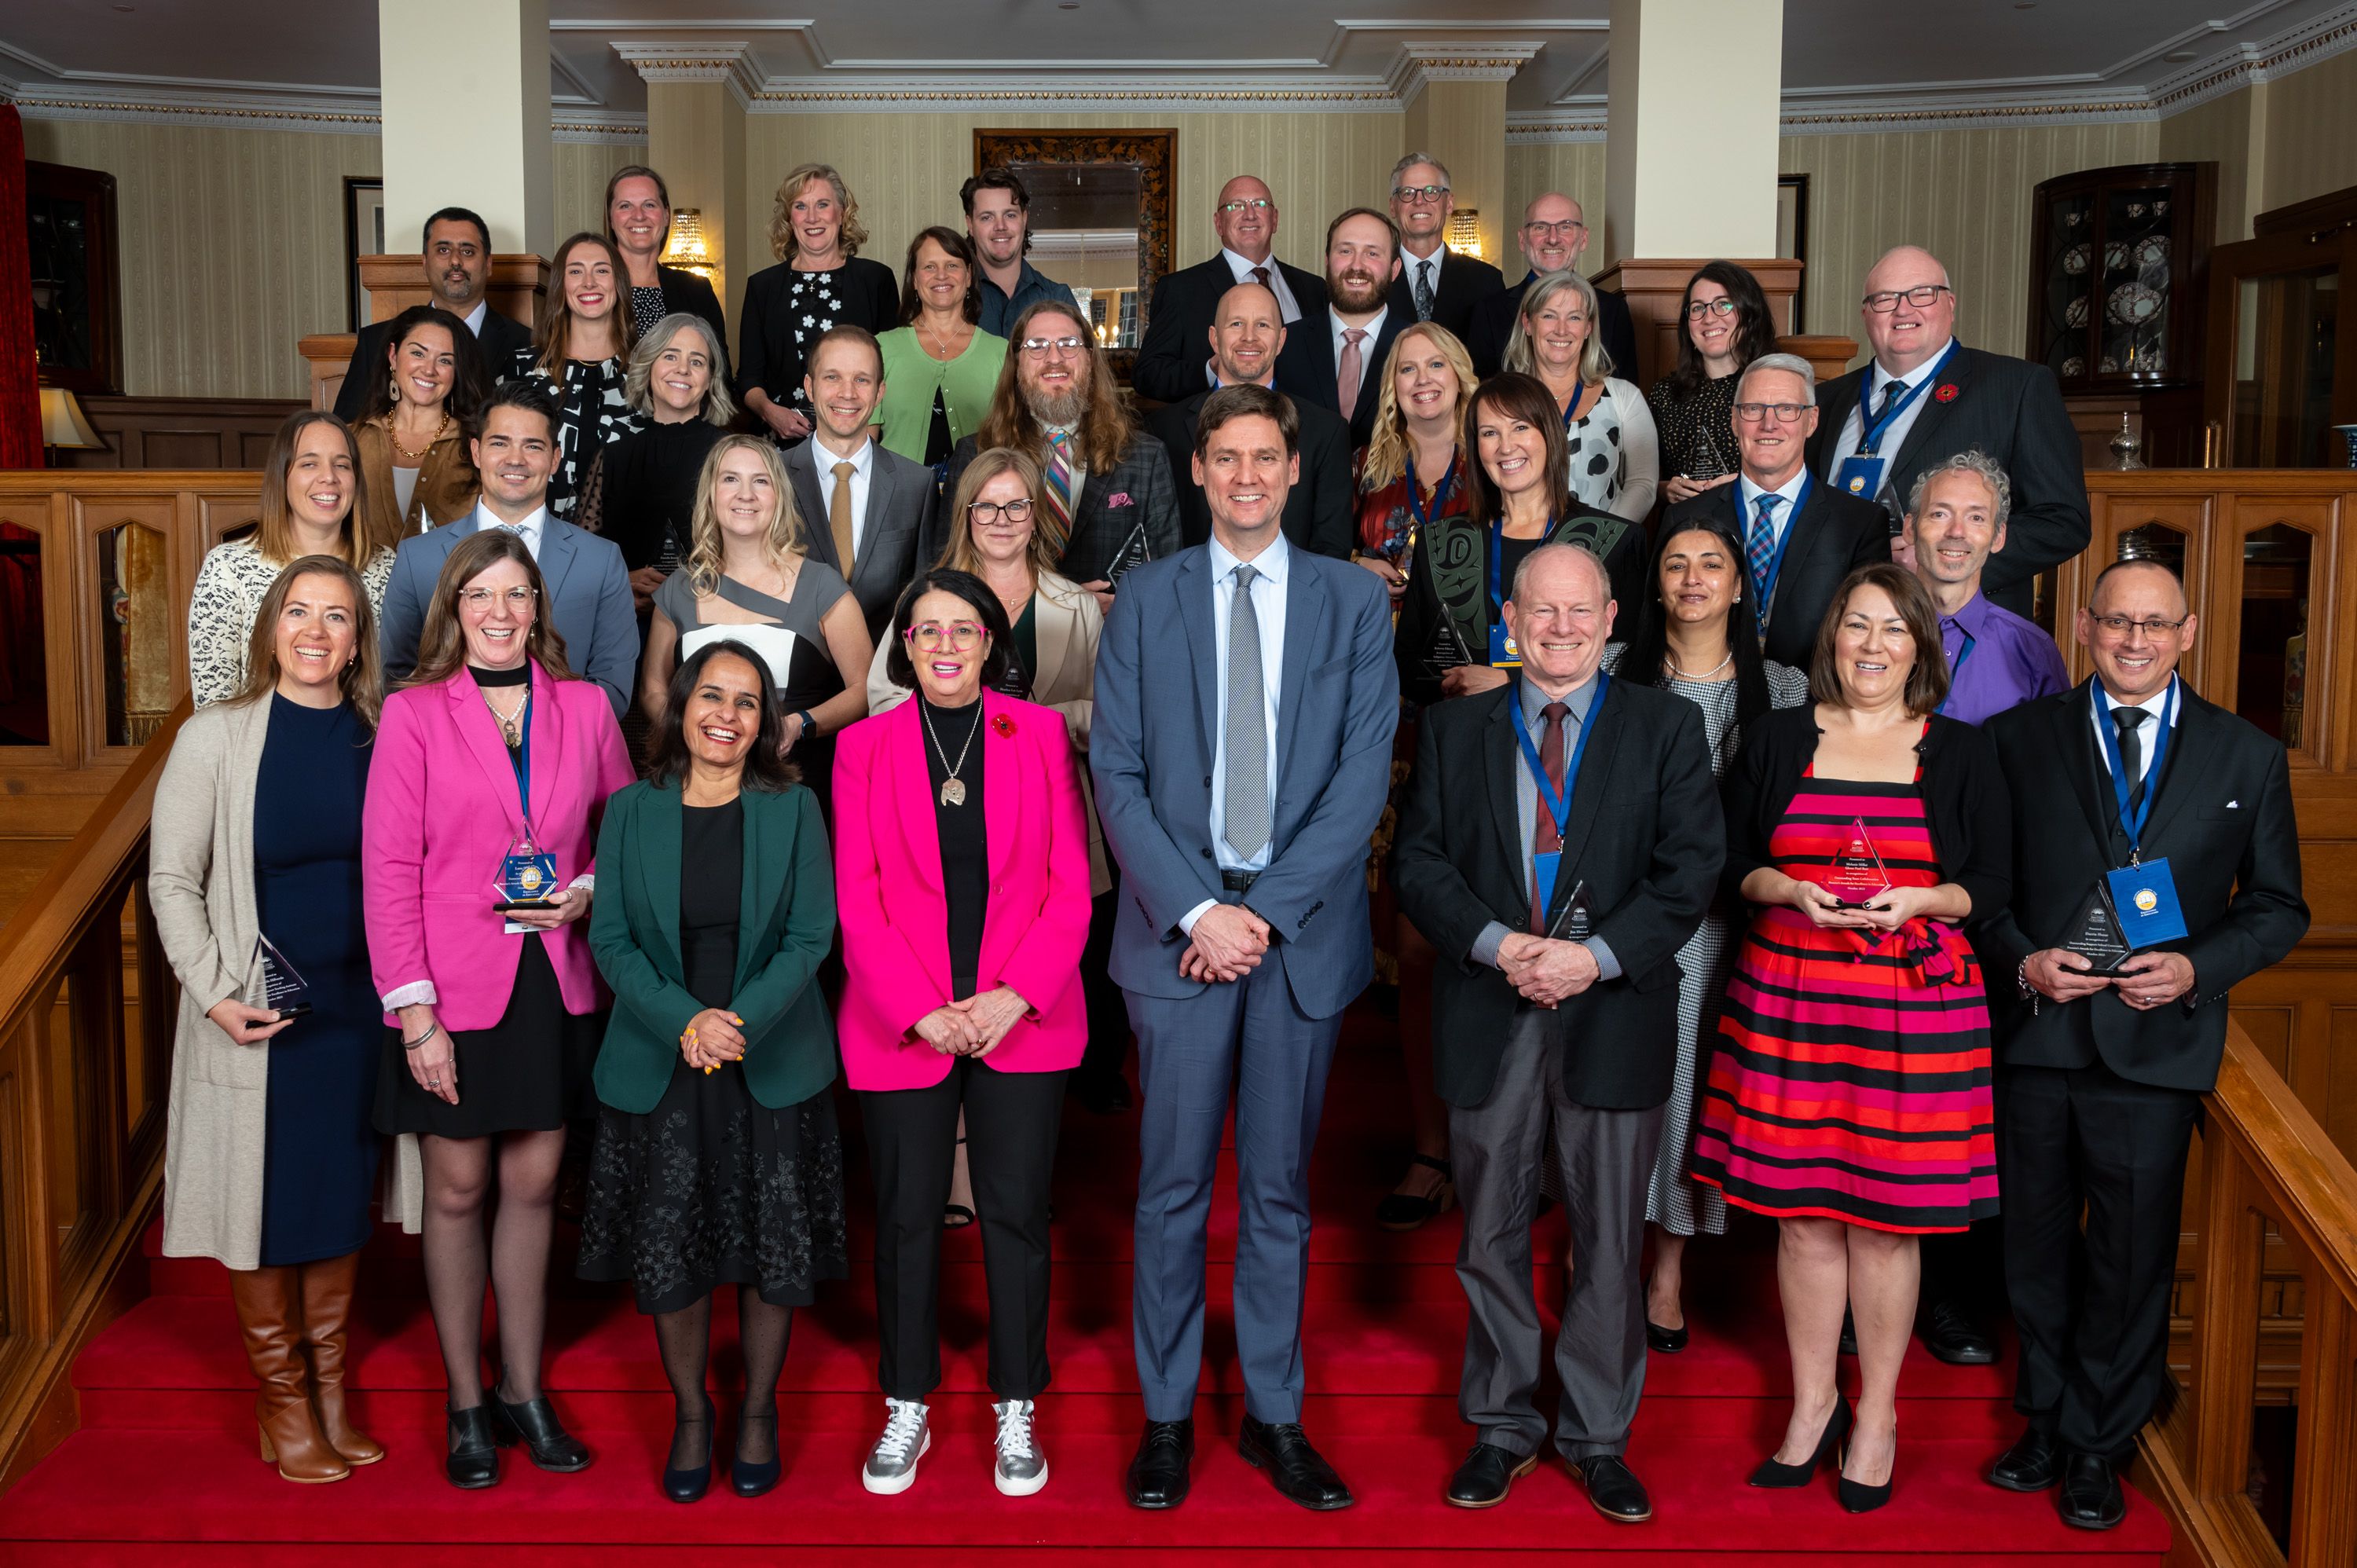 Premier’s Awards for Excellence in Education Award Finalists